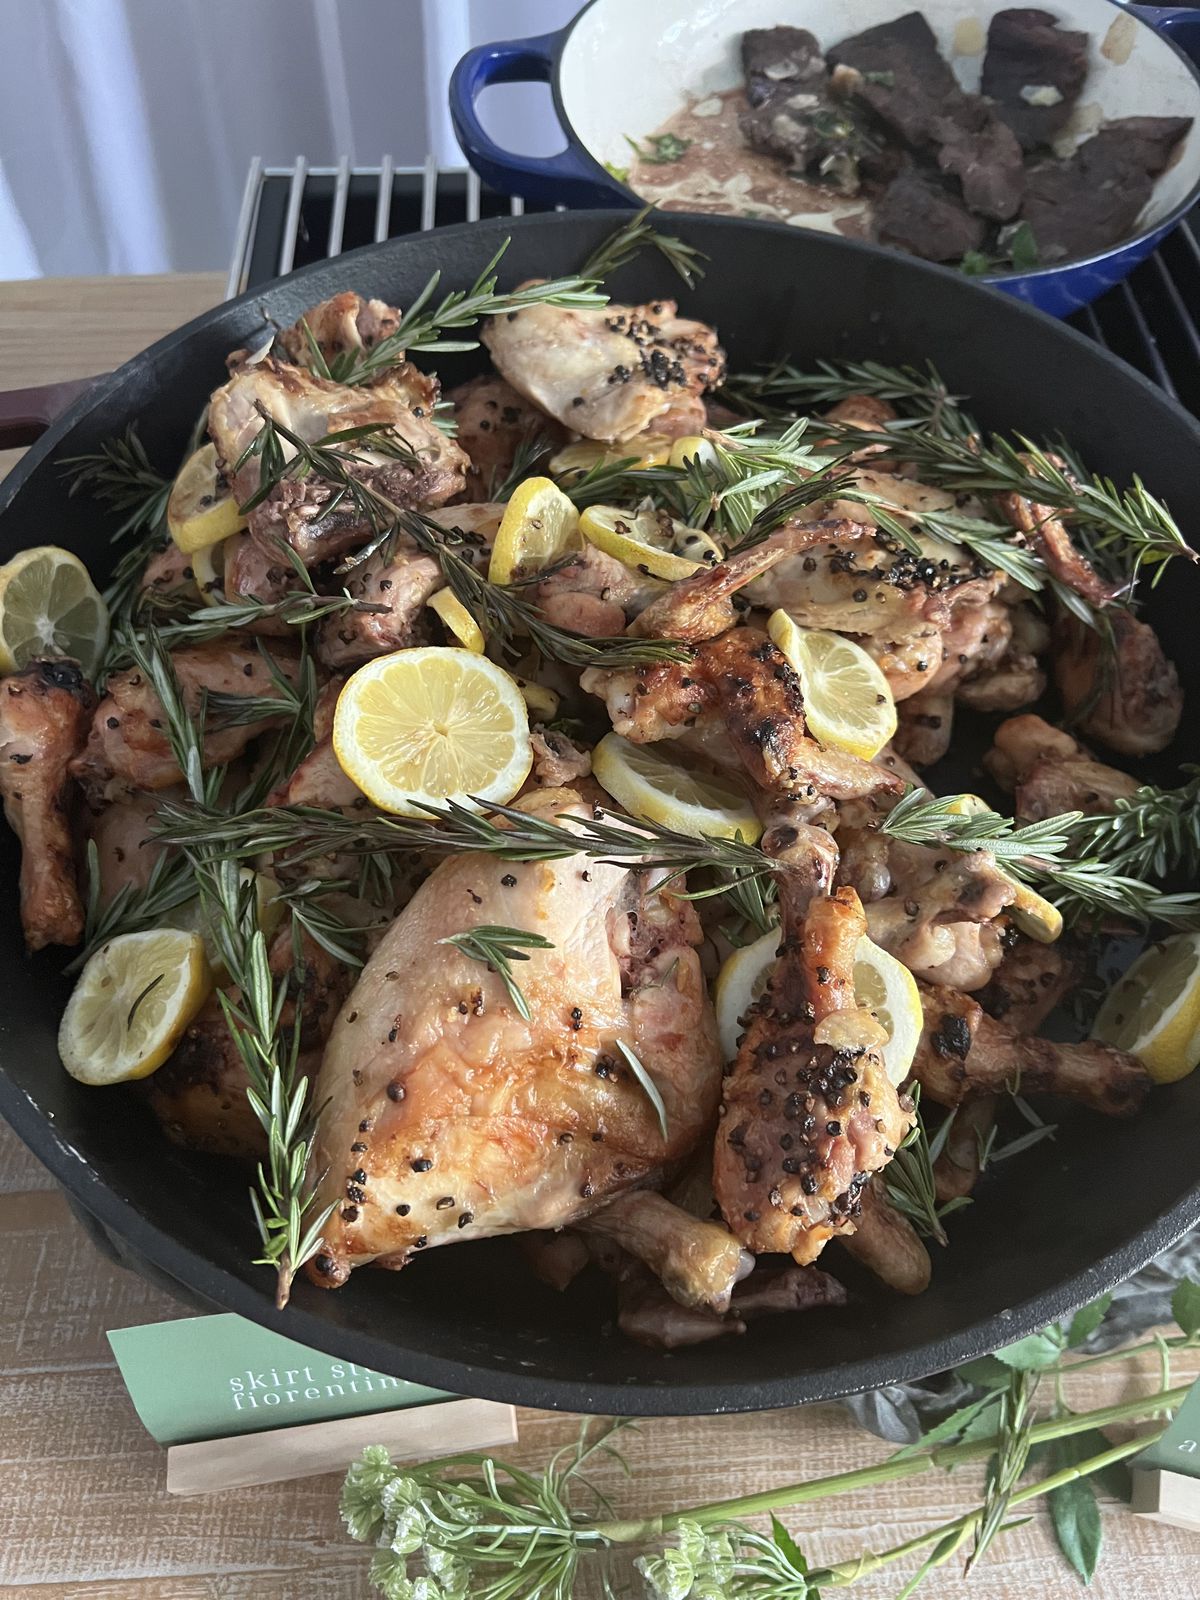 A bowl holds various pieces of roast chicken dressed up with sprigs of rosemary and lemon slices.